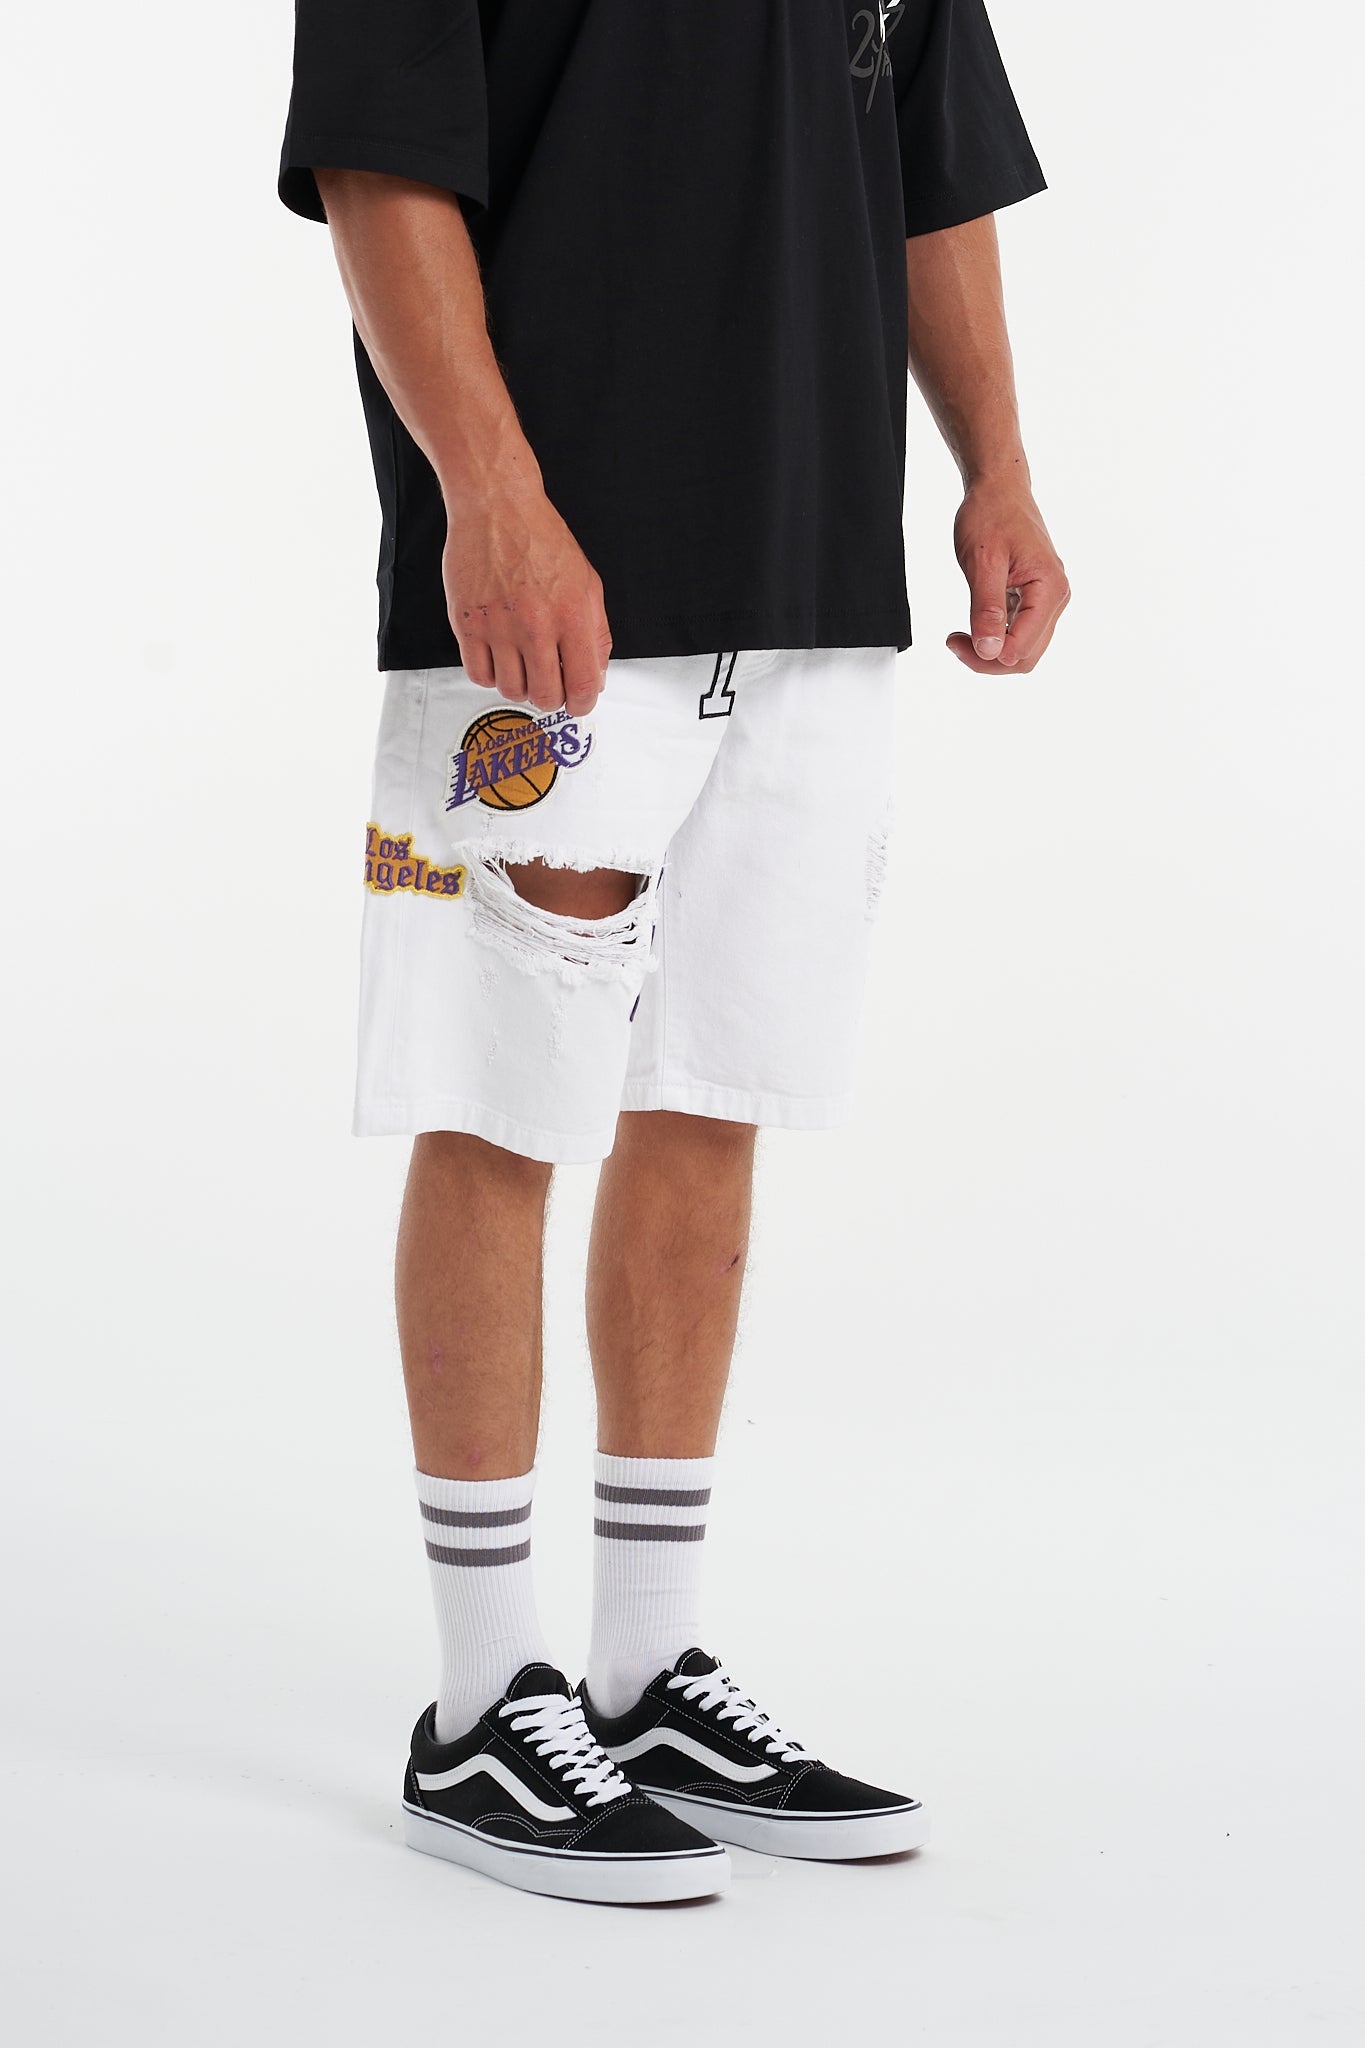 Patch Work White Ripped Shorts - UNEFFECTED STUDIOS® - Shorts - UNEFFECTED STUDIOS®